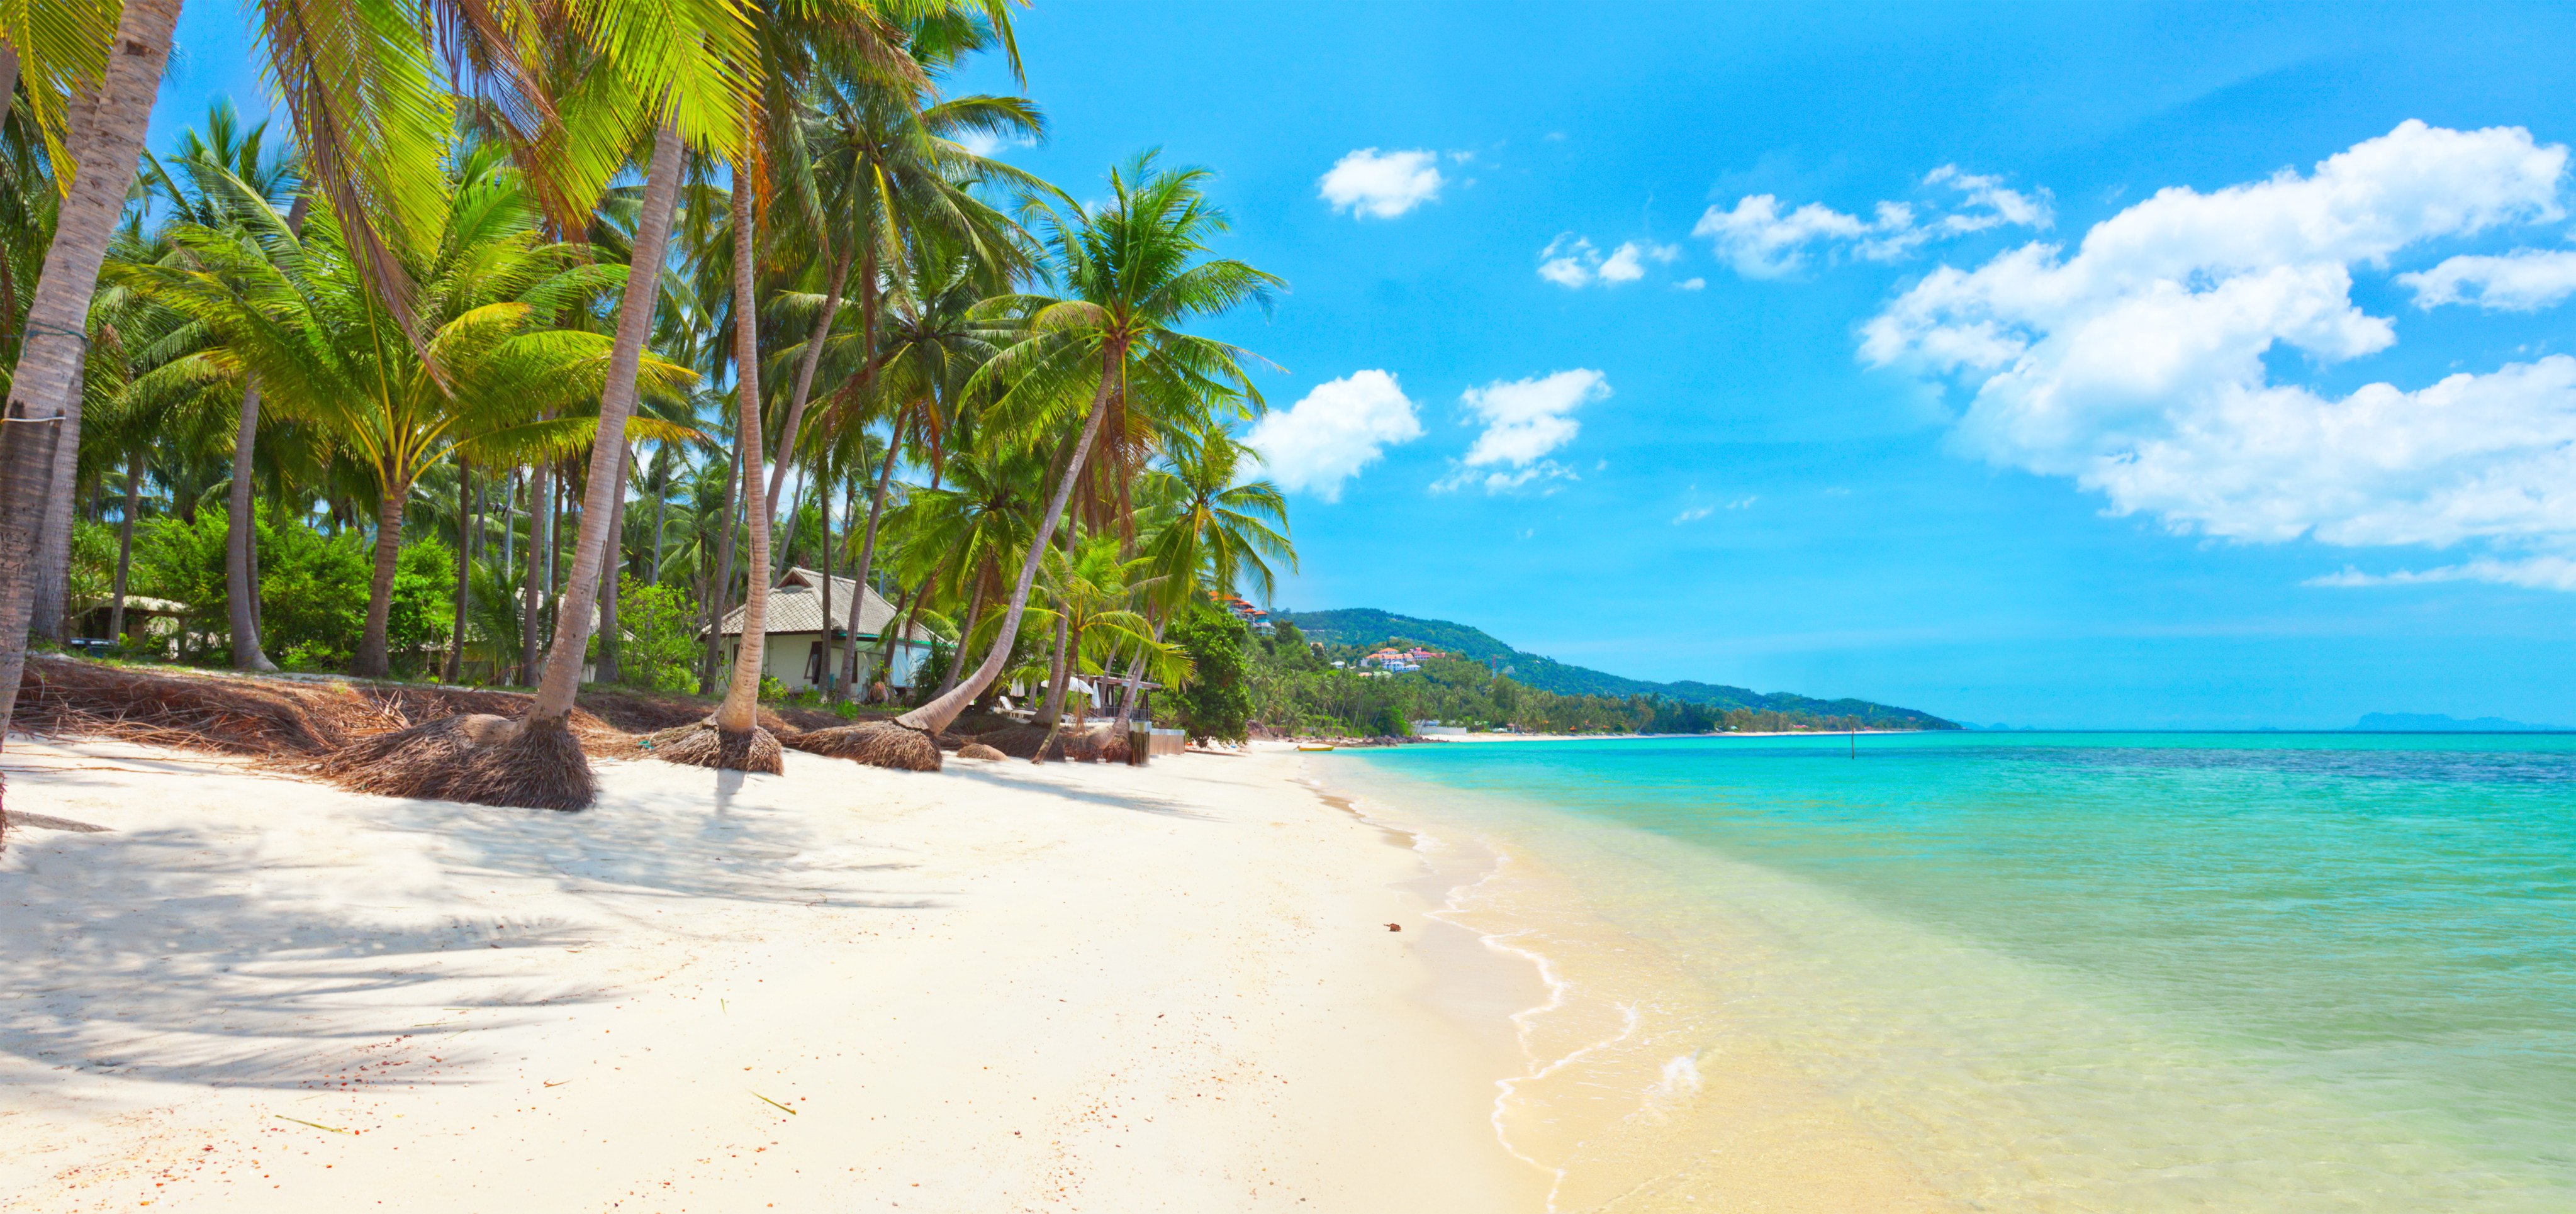 Thai island Koh Samui is facing a fresh water shortage, blamed on increased demand and ‘rapid development’, although the problem has been around since the mid-1990s. Above: Bang Po beach, Koh Samui. Photo: Shutterstock